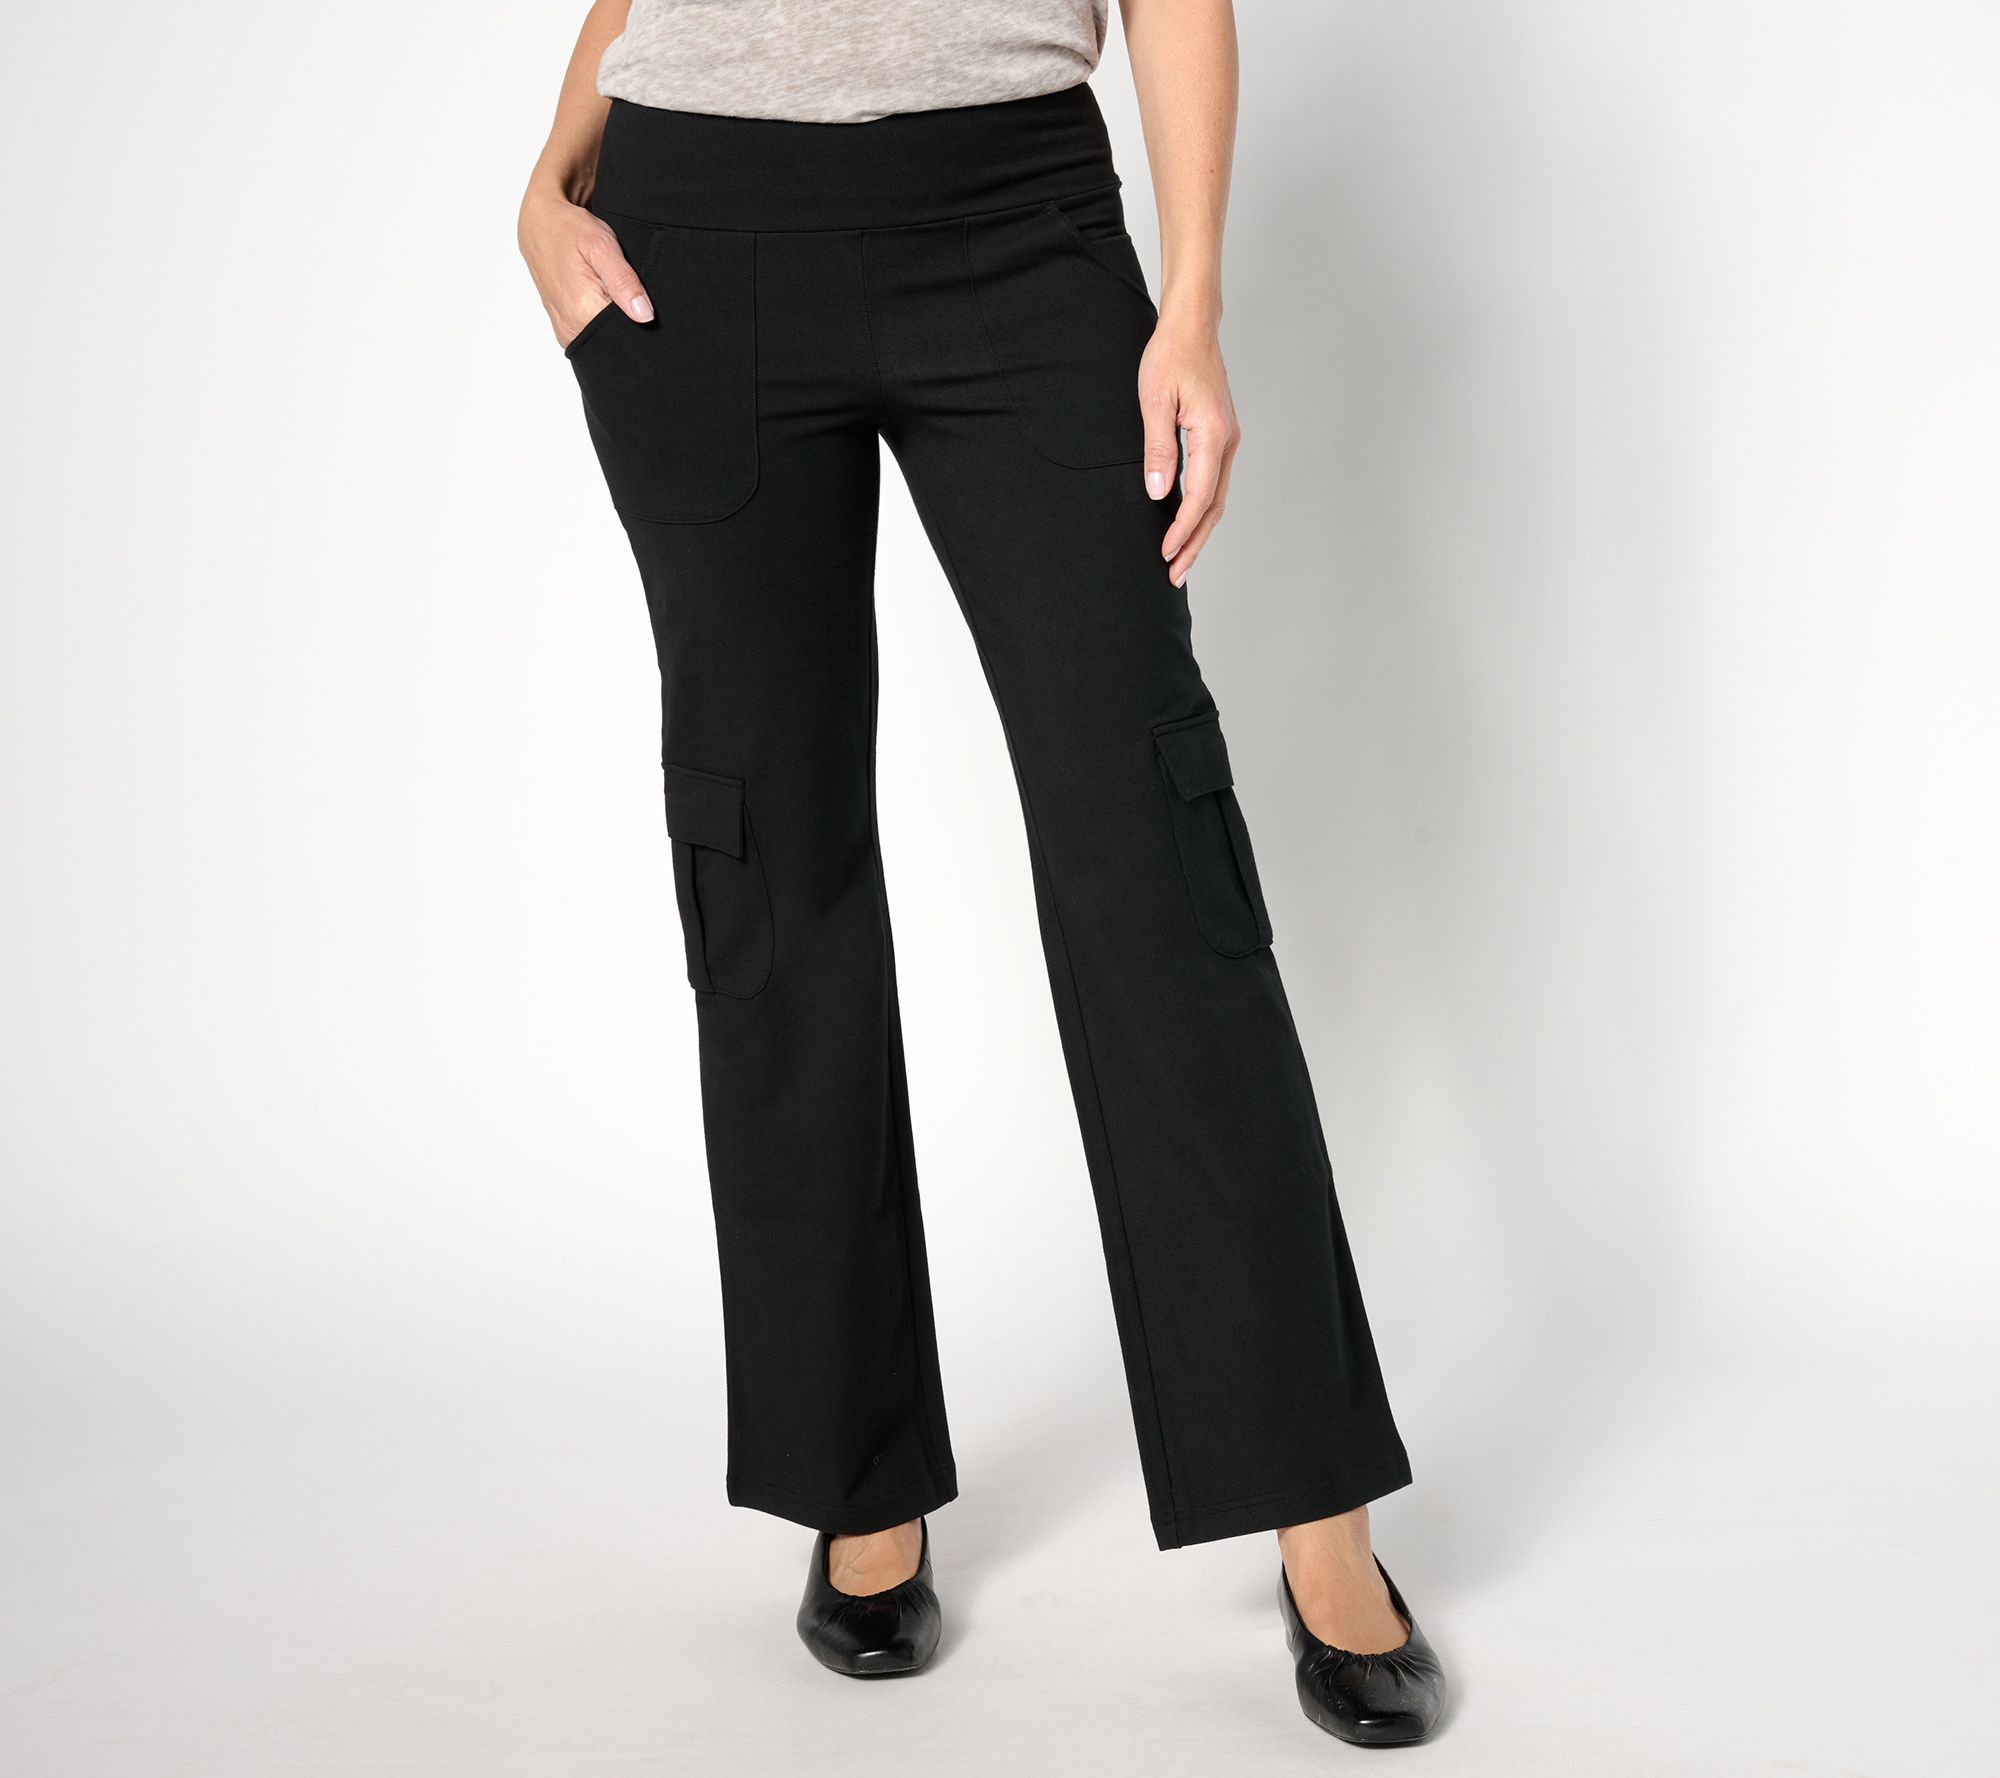 Women with Control - Black - Full-Length Pants 